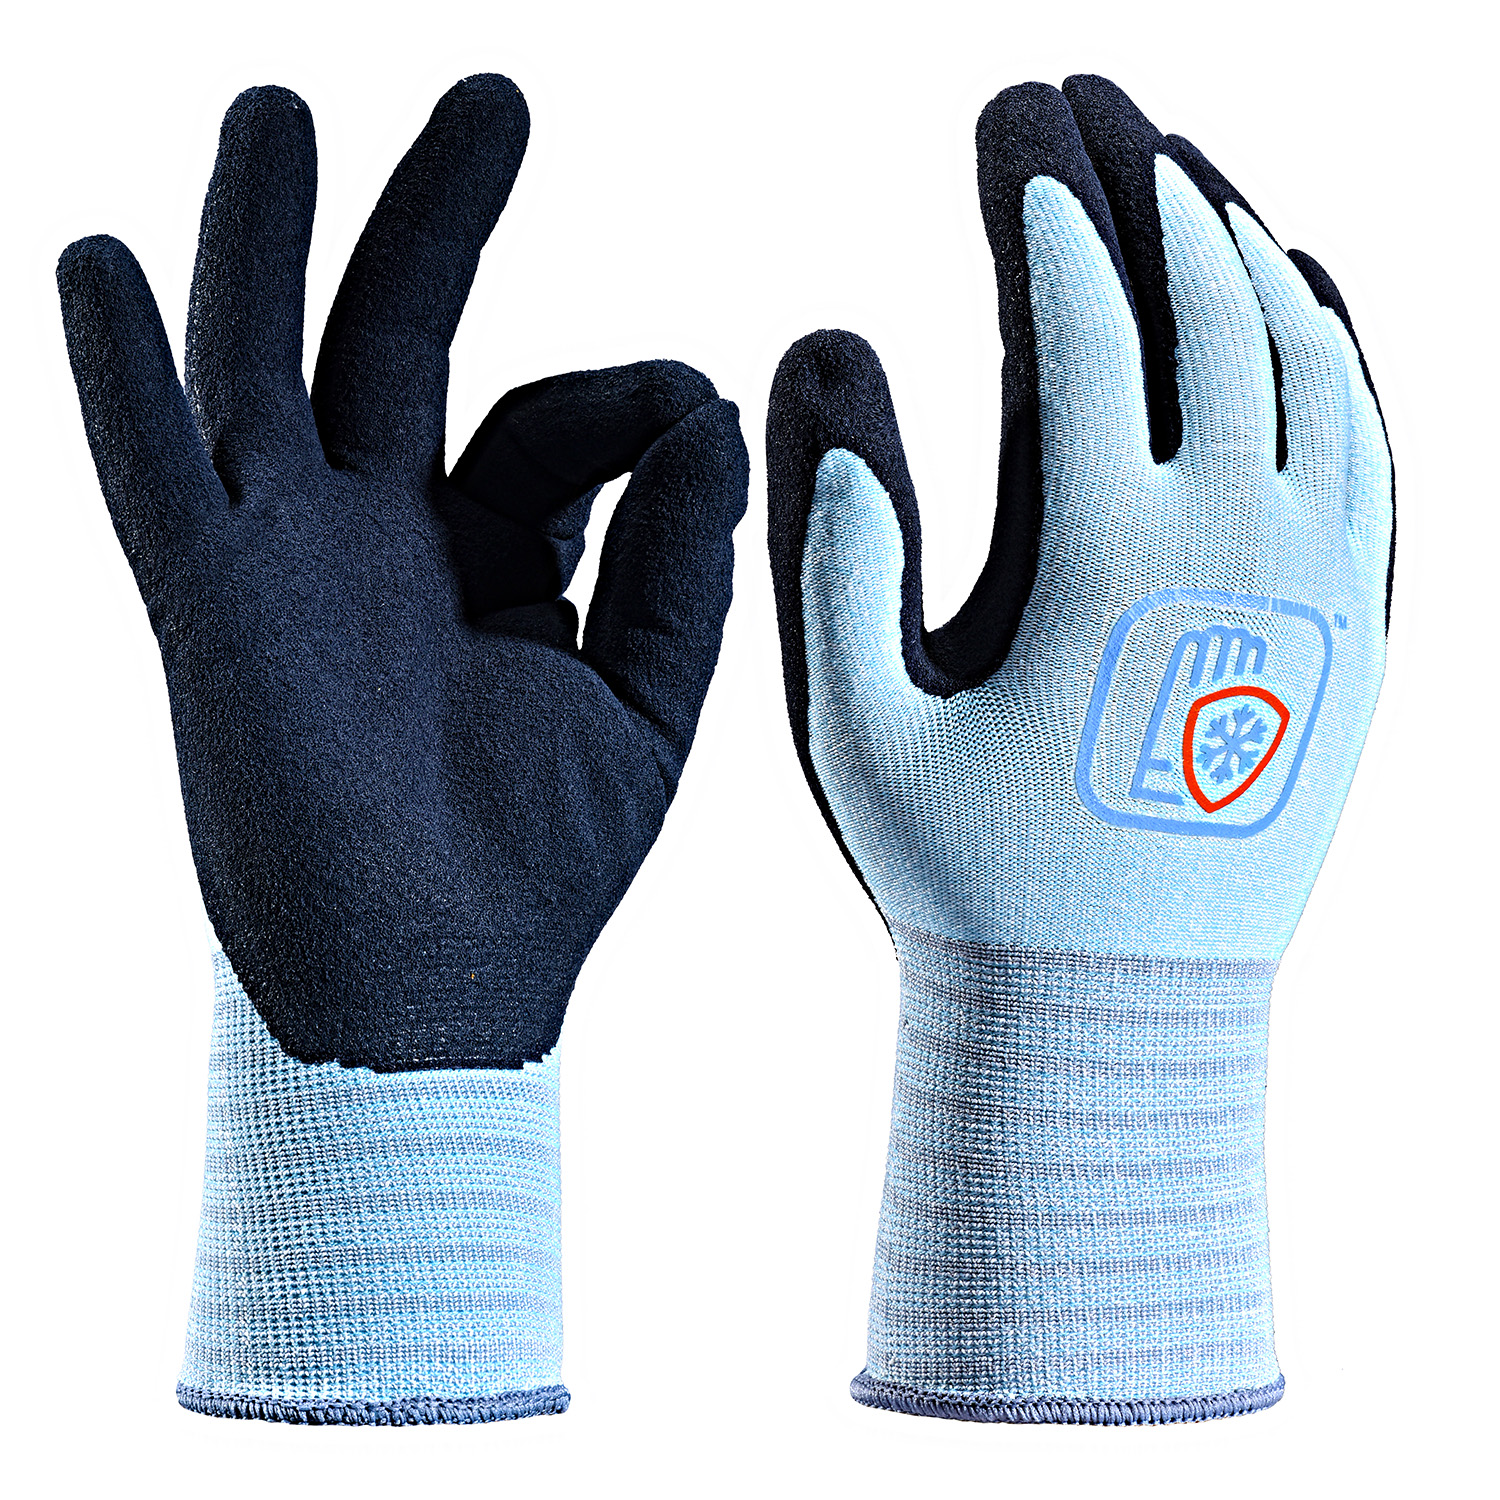 SAFEYEAR Safety Gloves Work Gloves With Natural Latex Coated